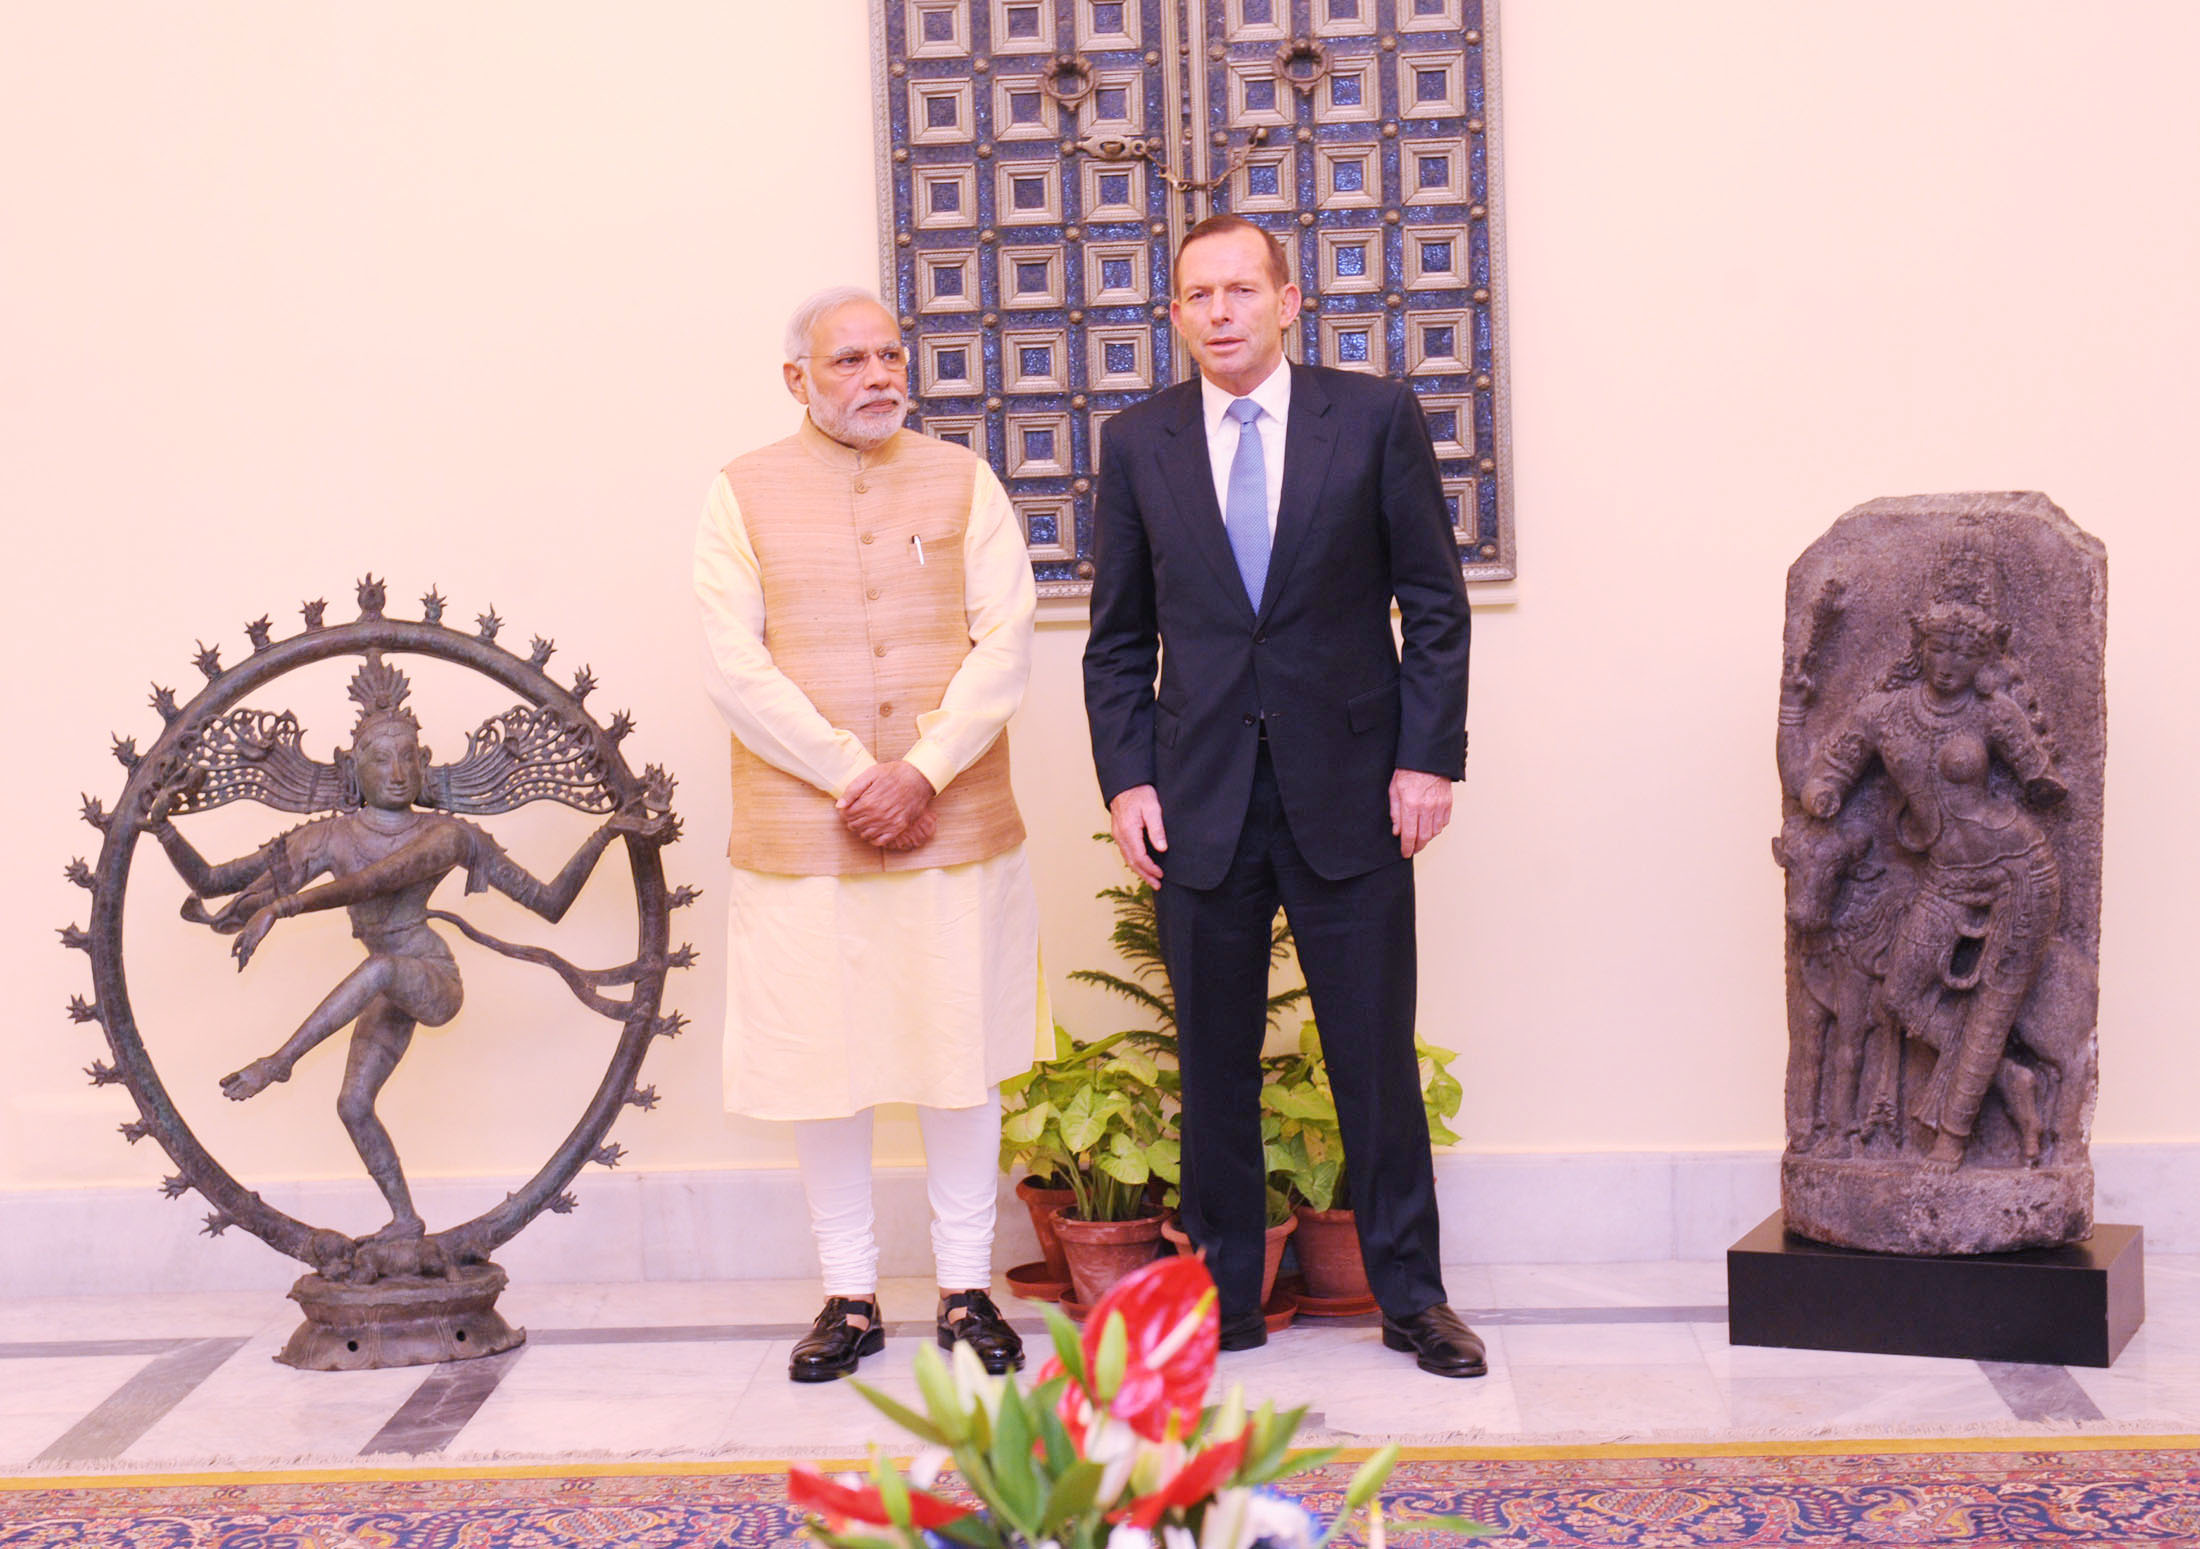 P M of Australia, Tony Abbott returning the two antique statues to India, in the presence of the P M, Narendra Modi,